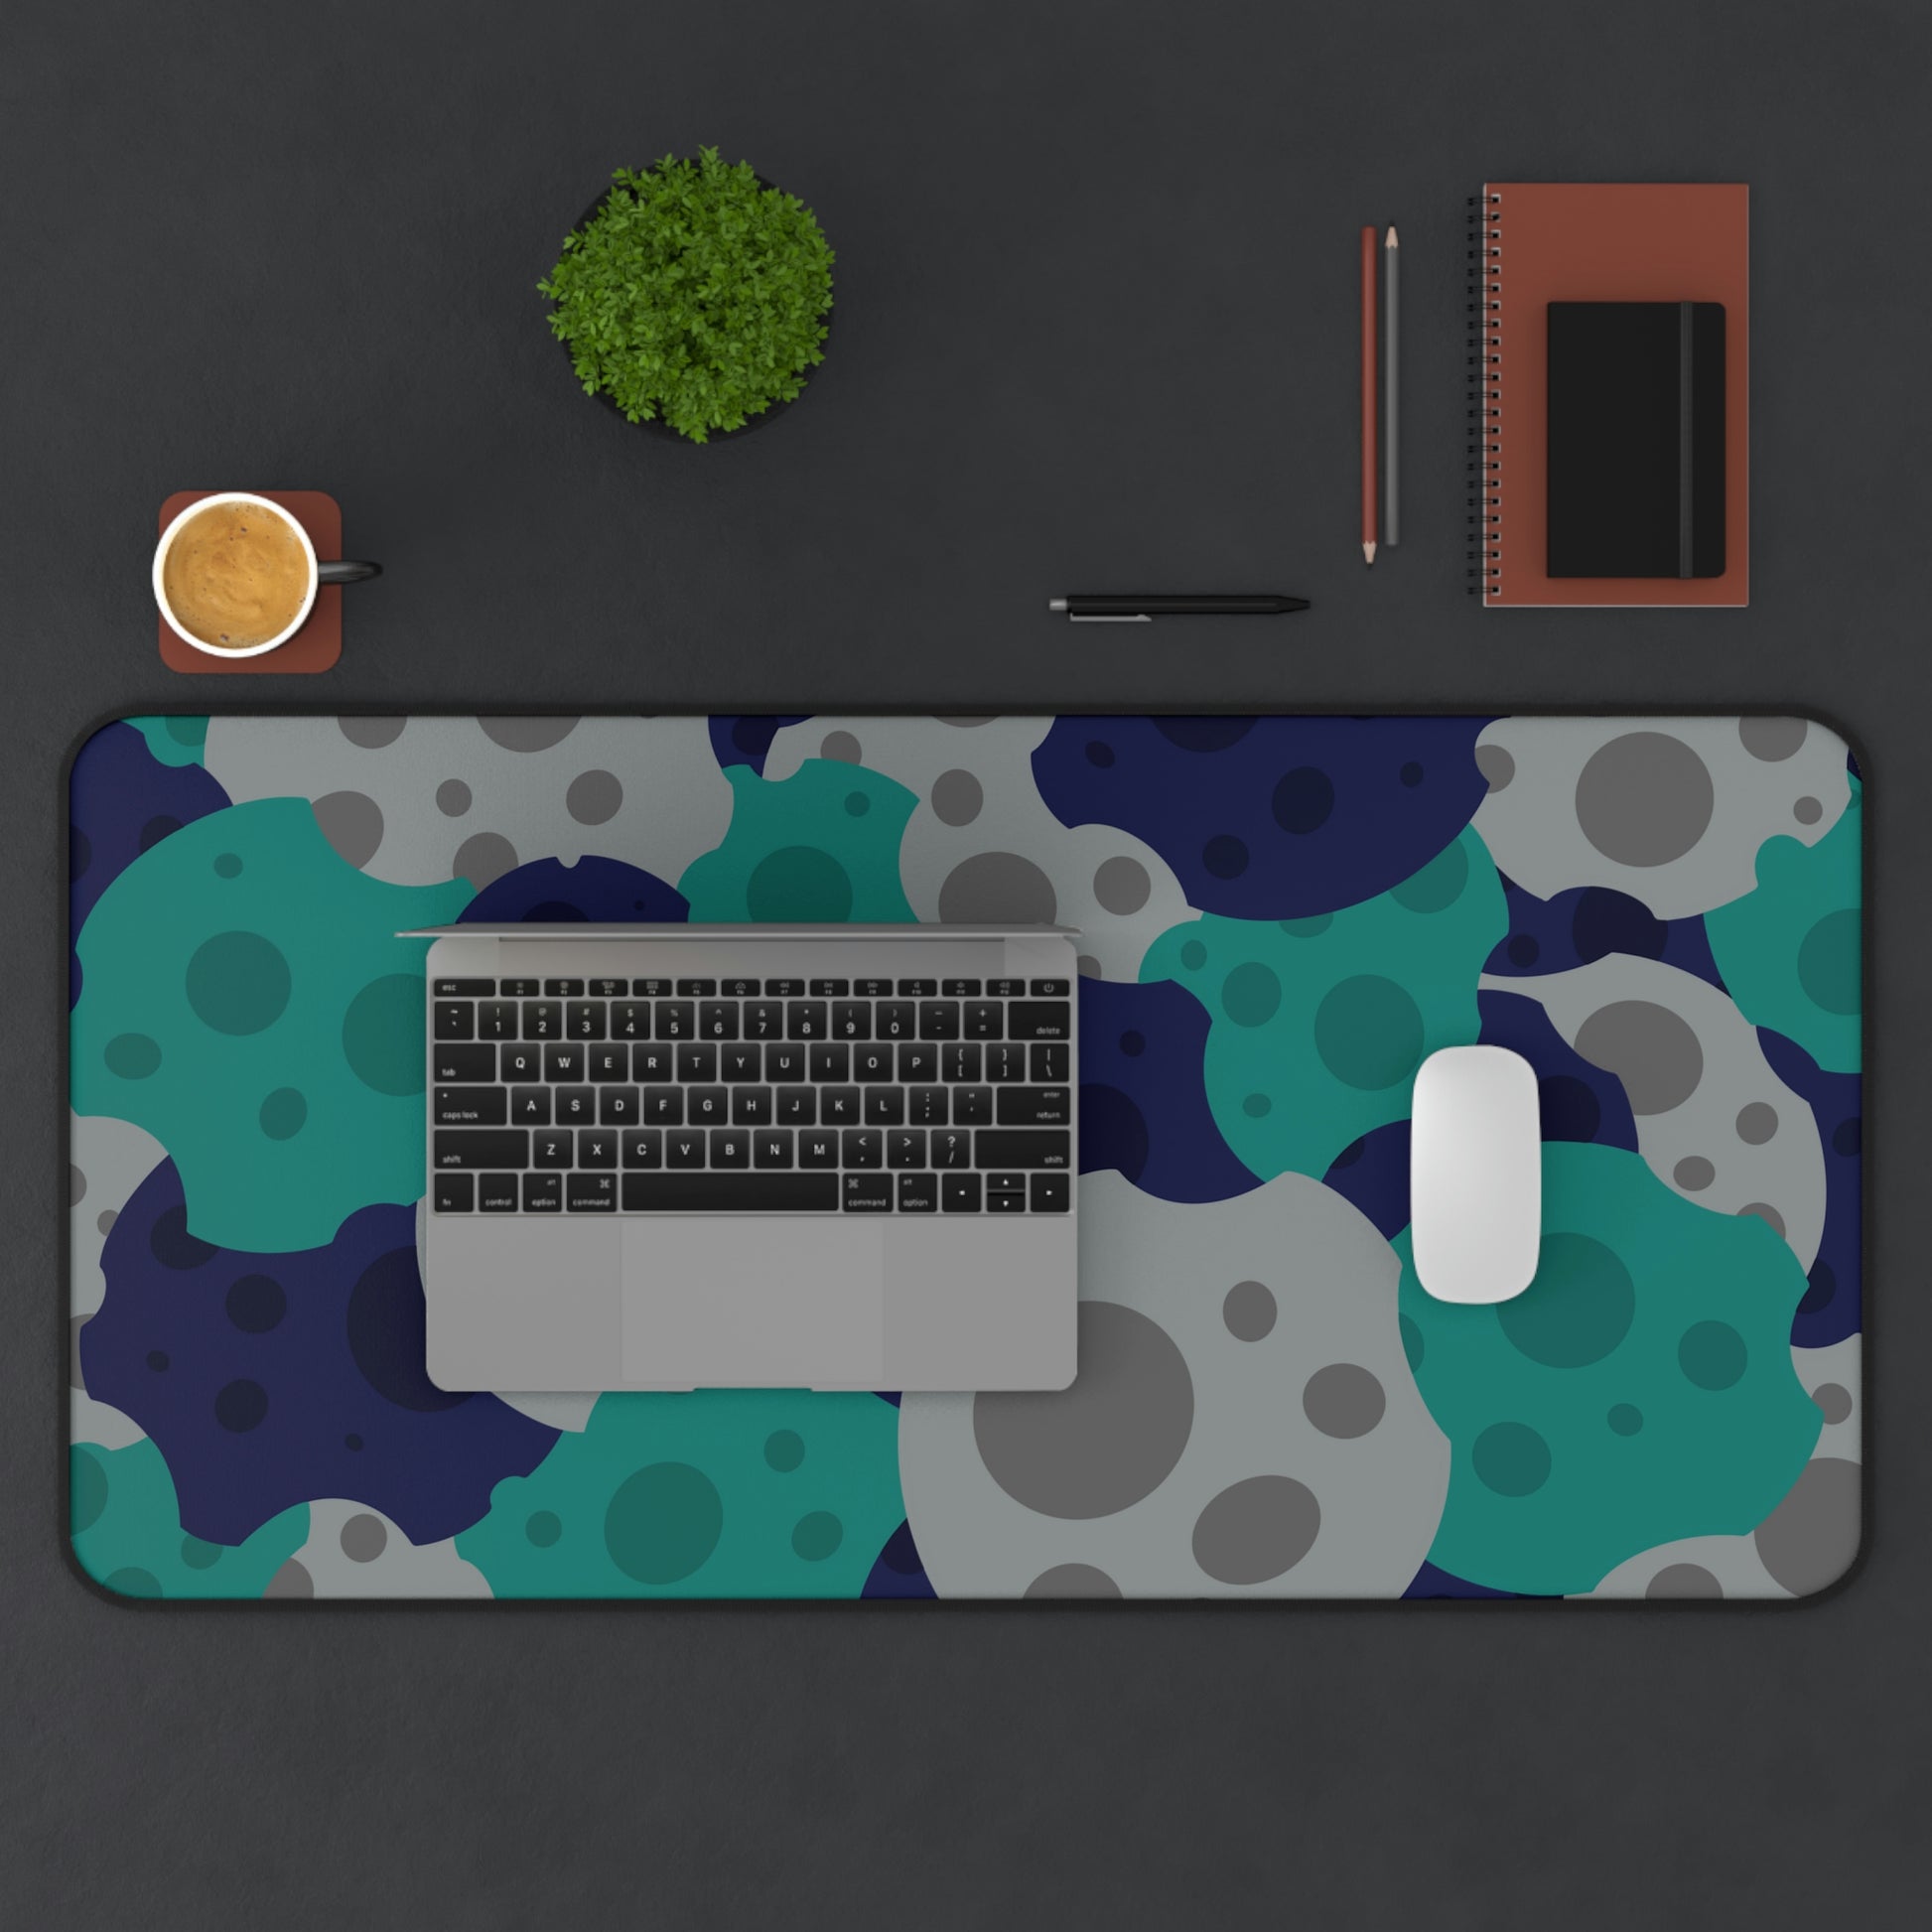 A 31" x 15.5" desk mat with gray, teal, and dark blue meteorites. A laptop and mouse sit on top of it.